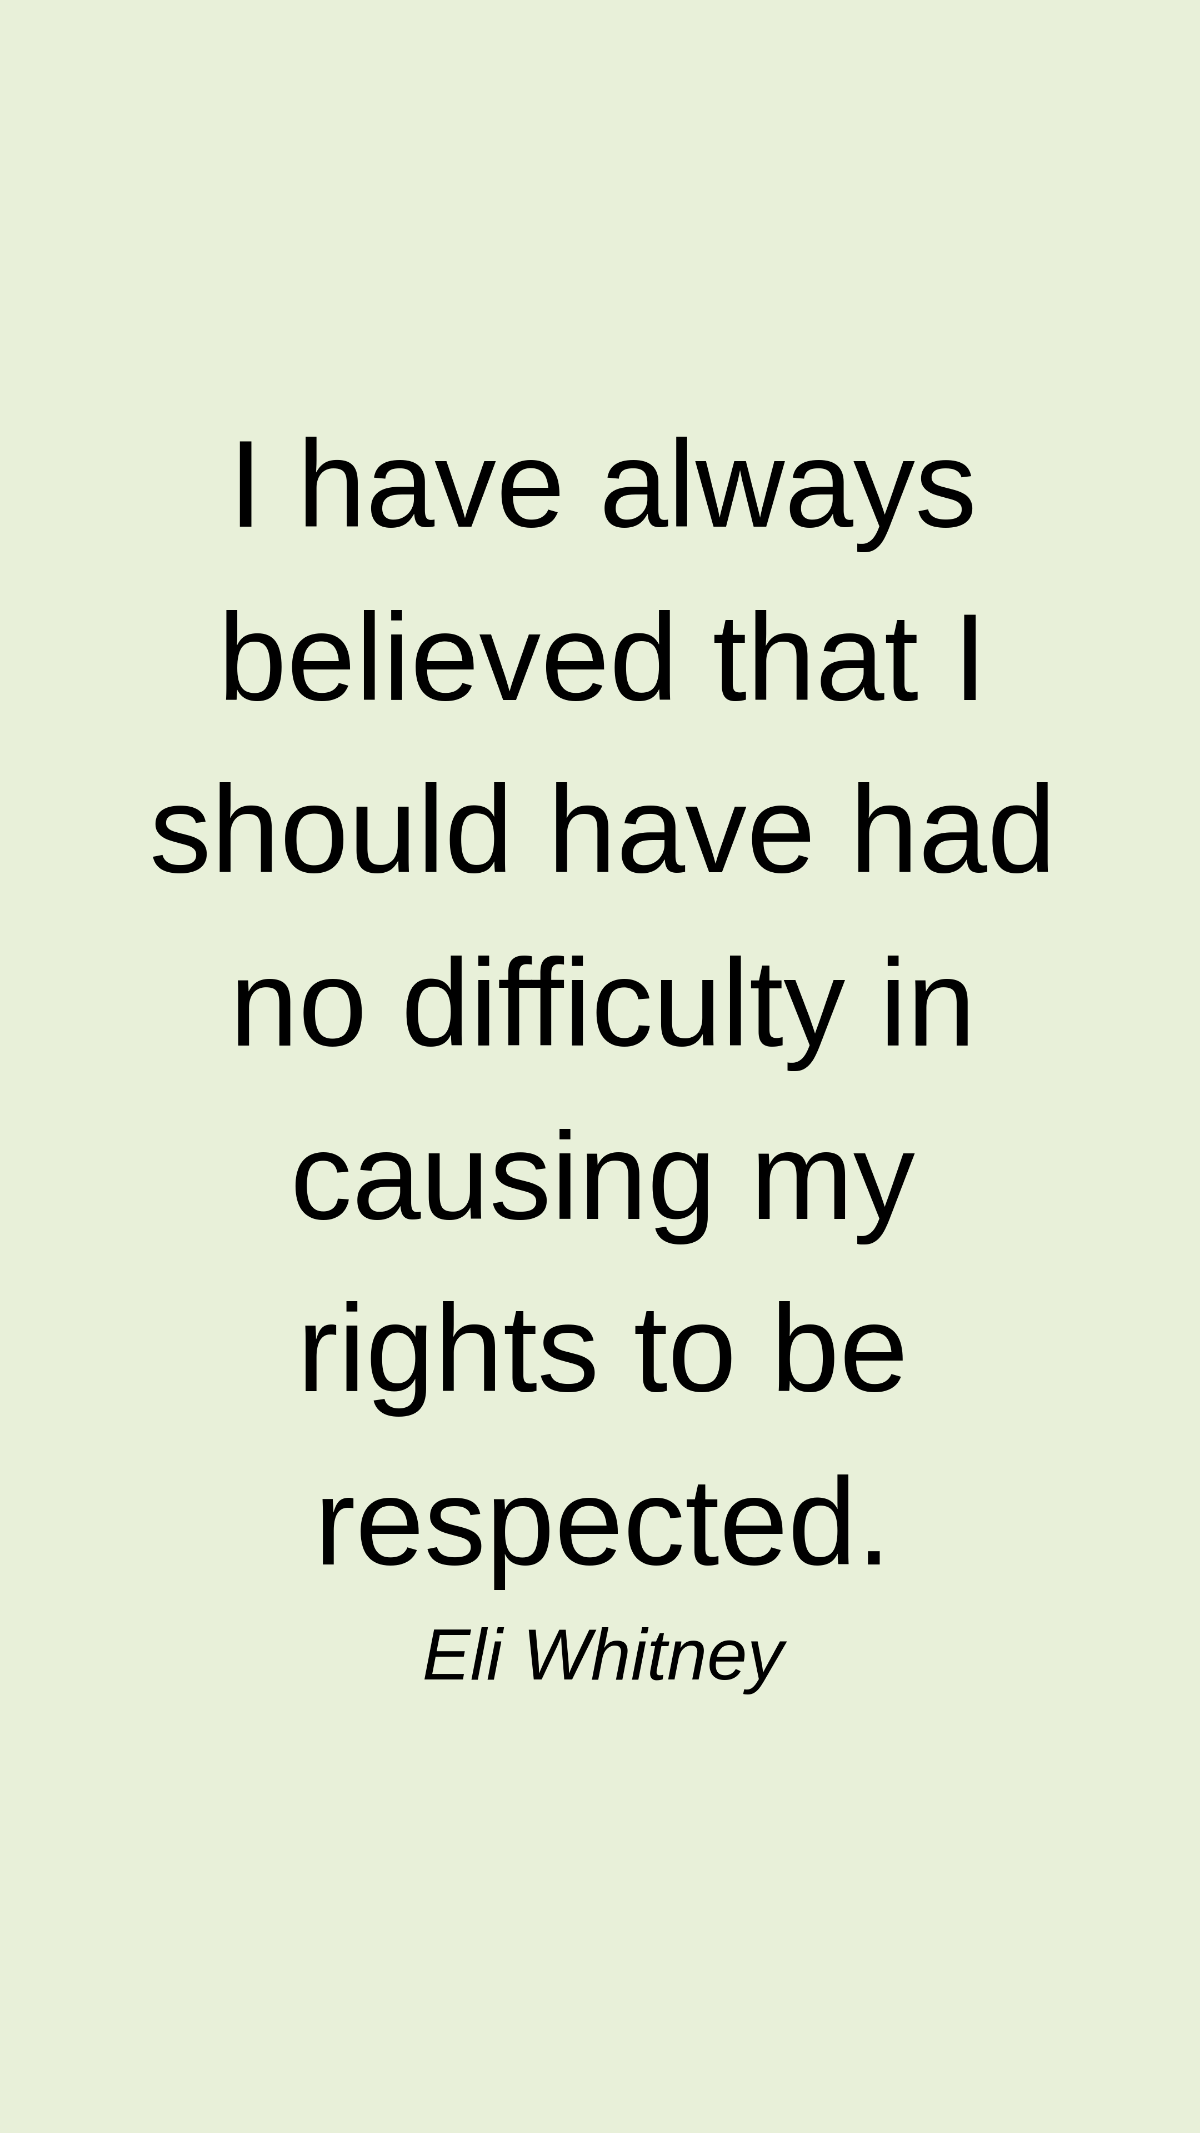 Eli Whitney - I have always believed that I should have had no difficulty in causing my rights to be respected. Template